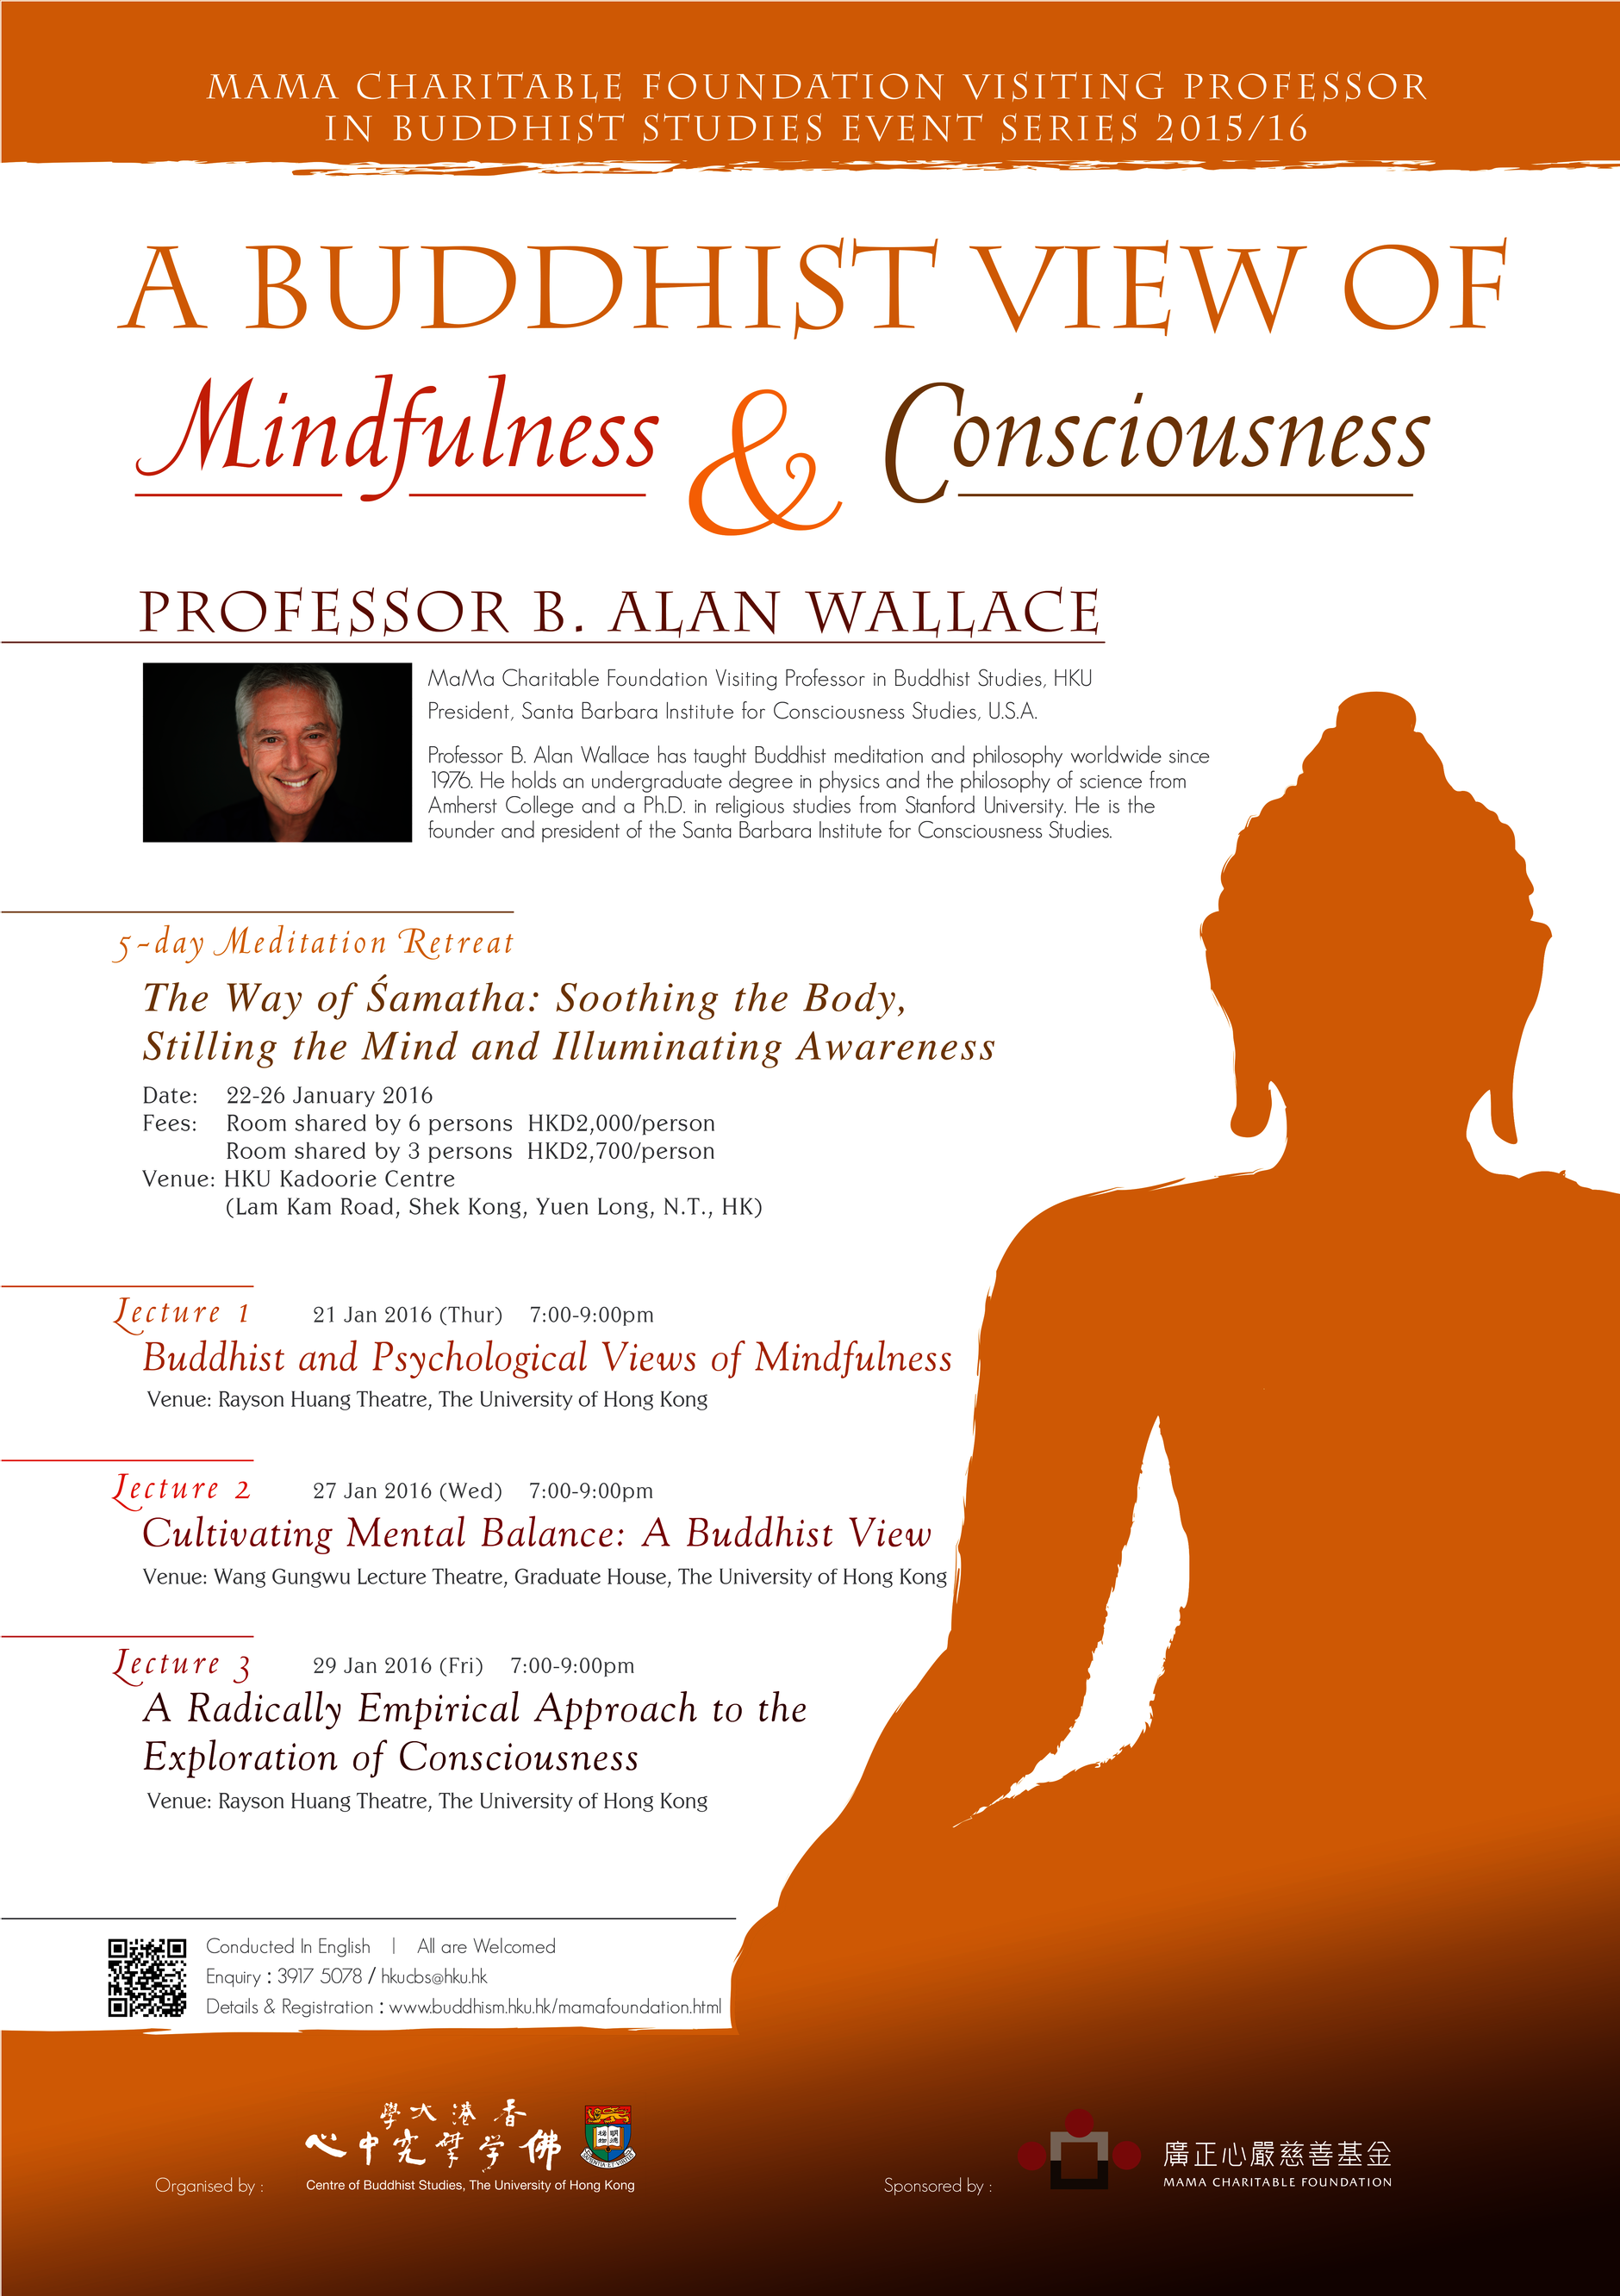 5-Day Meditation Retreat & Lecture Series by Professor B. Alan Wallace